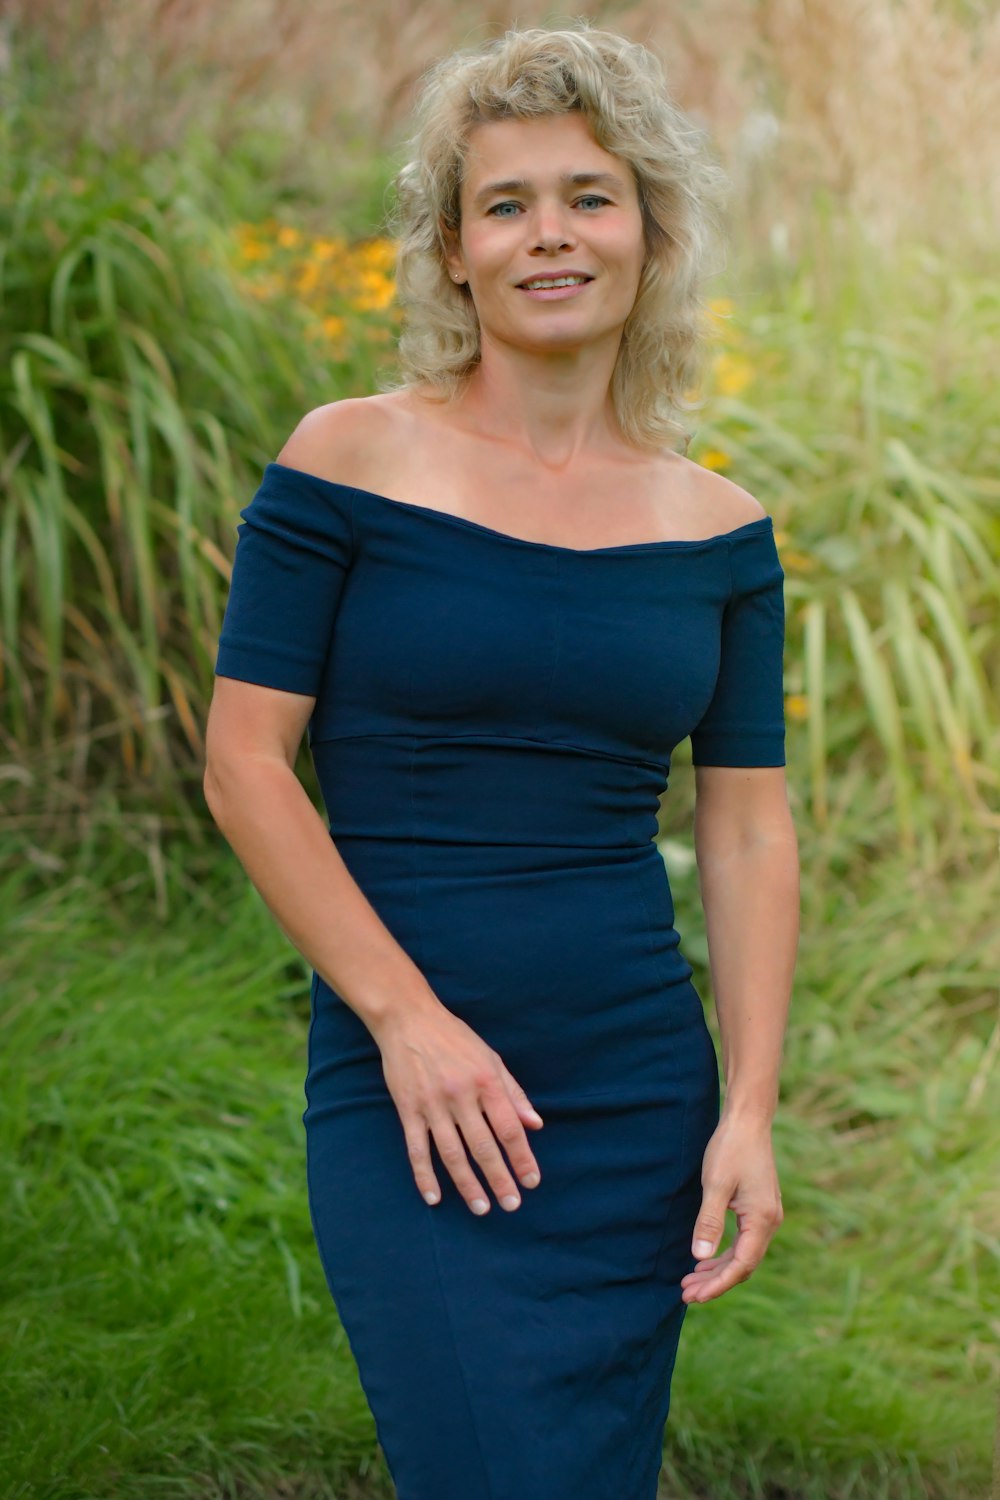 a woman in a blue dress posing for a picture